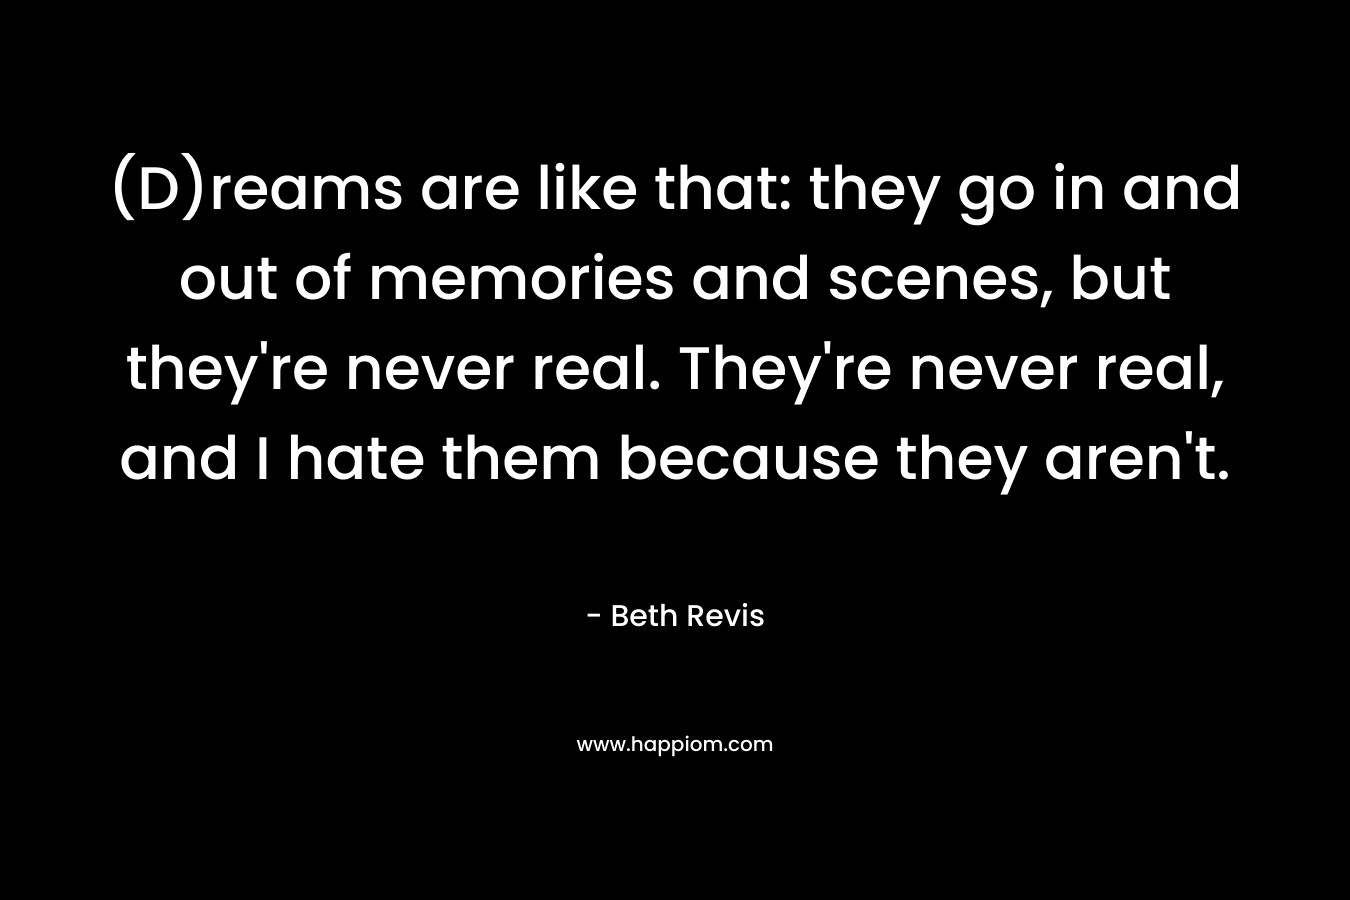 (D)reams are like that: they go in and out of memories and scenes, but they’re never real. They’re never real, and I hate them because they aren’t. – Beth Revis